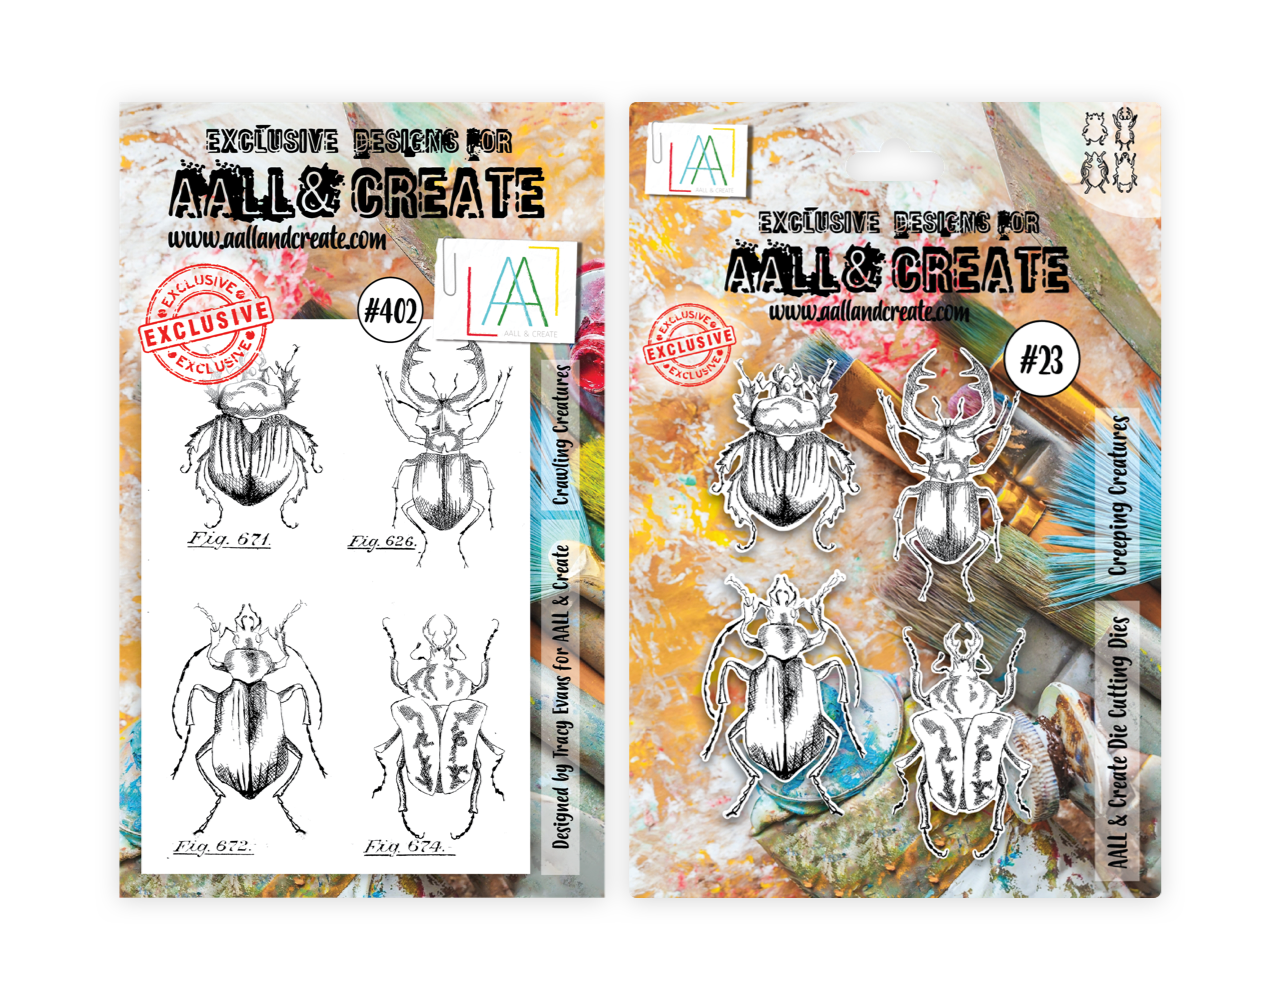 Aall&create - DIES #23 AND STAMP #402